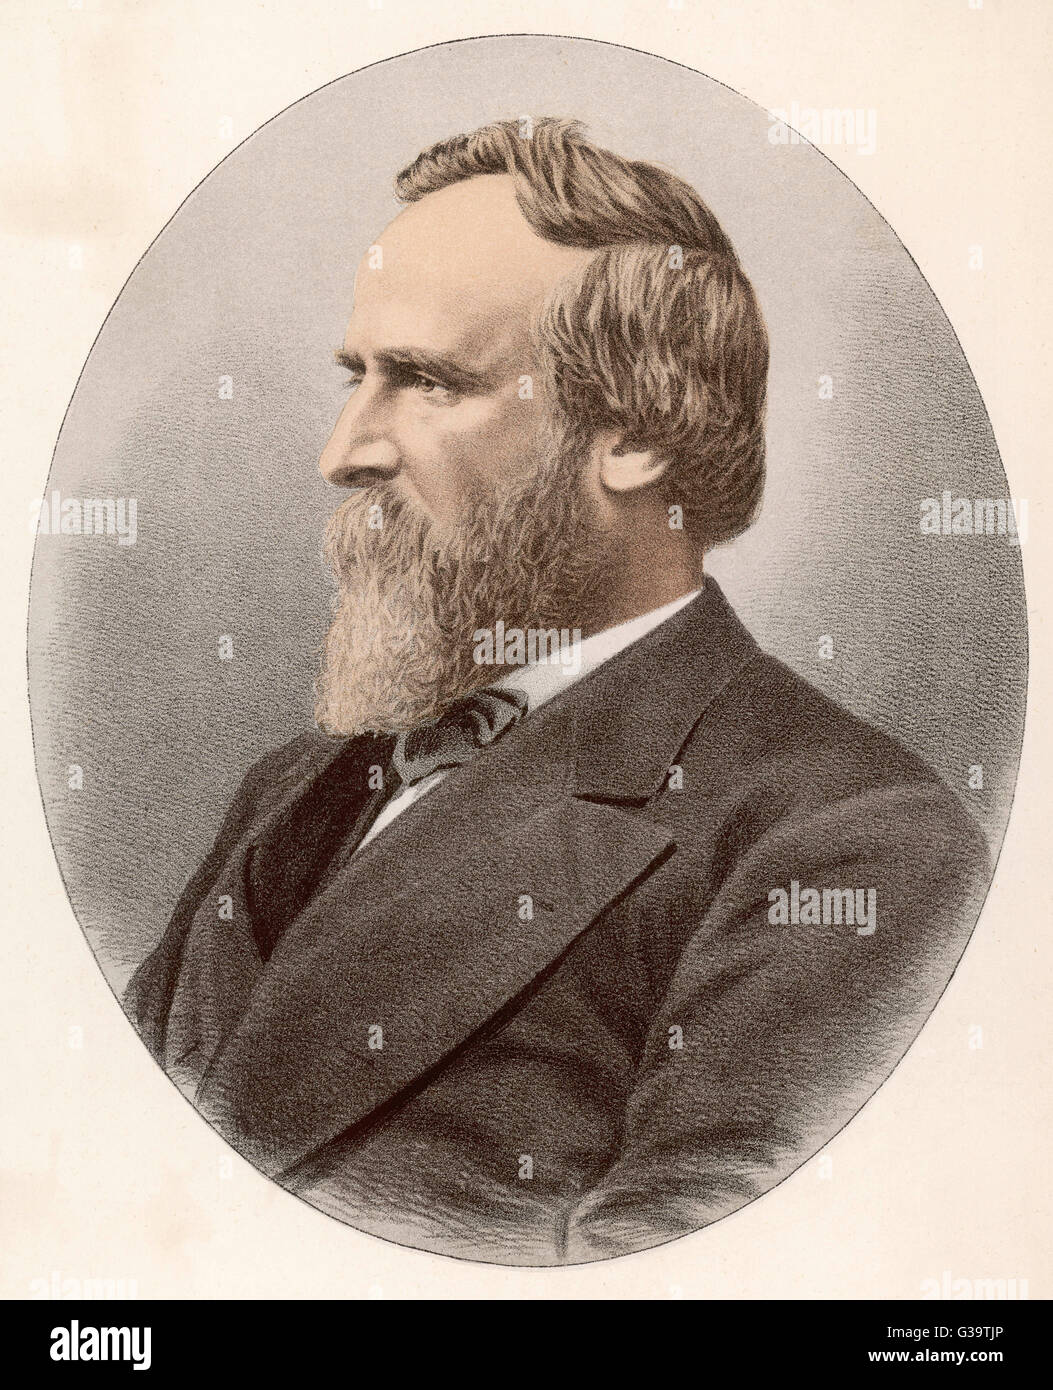 HAYES 19th President Republican Photo Portrait MODERN TRADING CARD RUTHERFORD B 